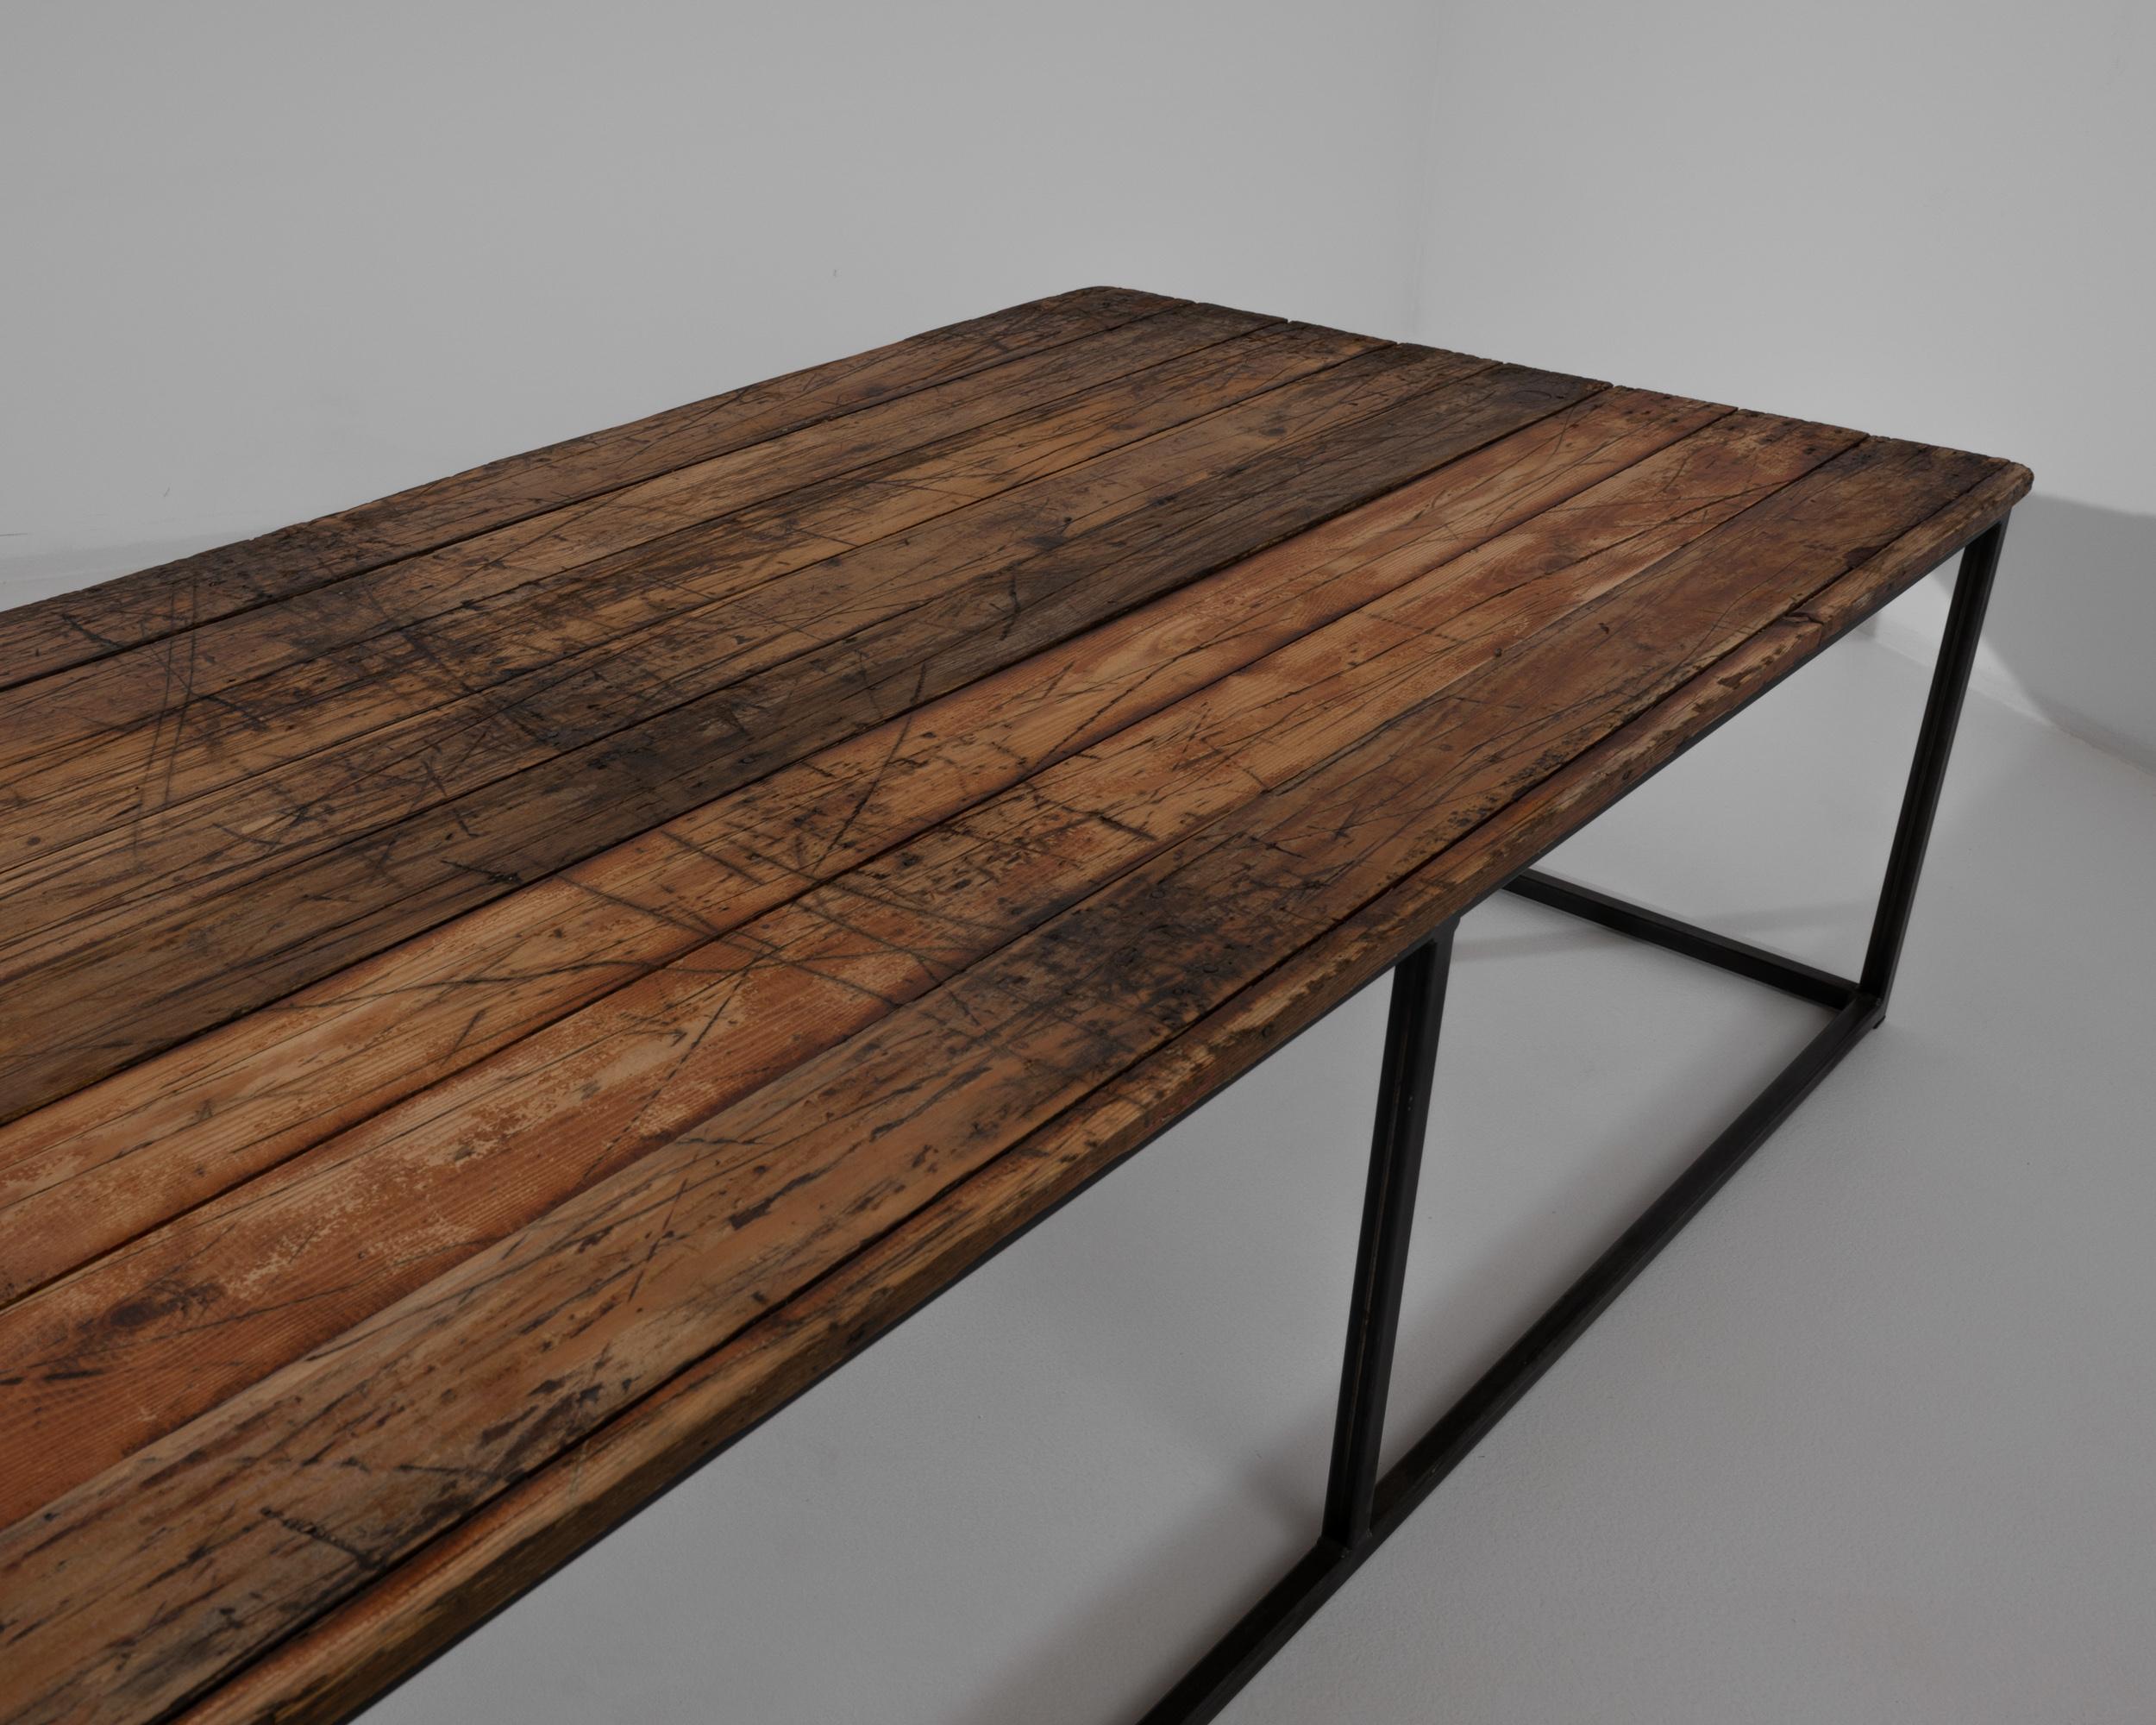 Wooden planks from France, circa 1950, rest on a steel base. Blending sleek and rustic, this 18” tall coffee table makes a comfortable and stylish place to rest your drink. Simple symmetry sings in this handcrafted table featuring a minimal metal